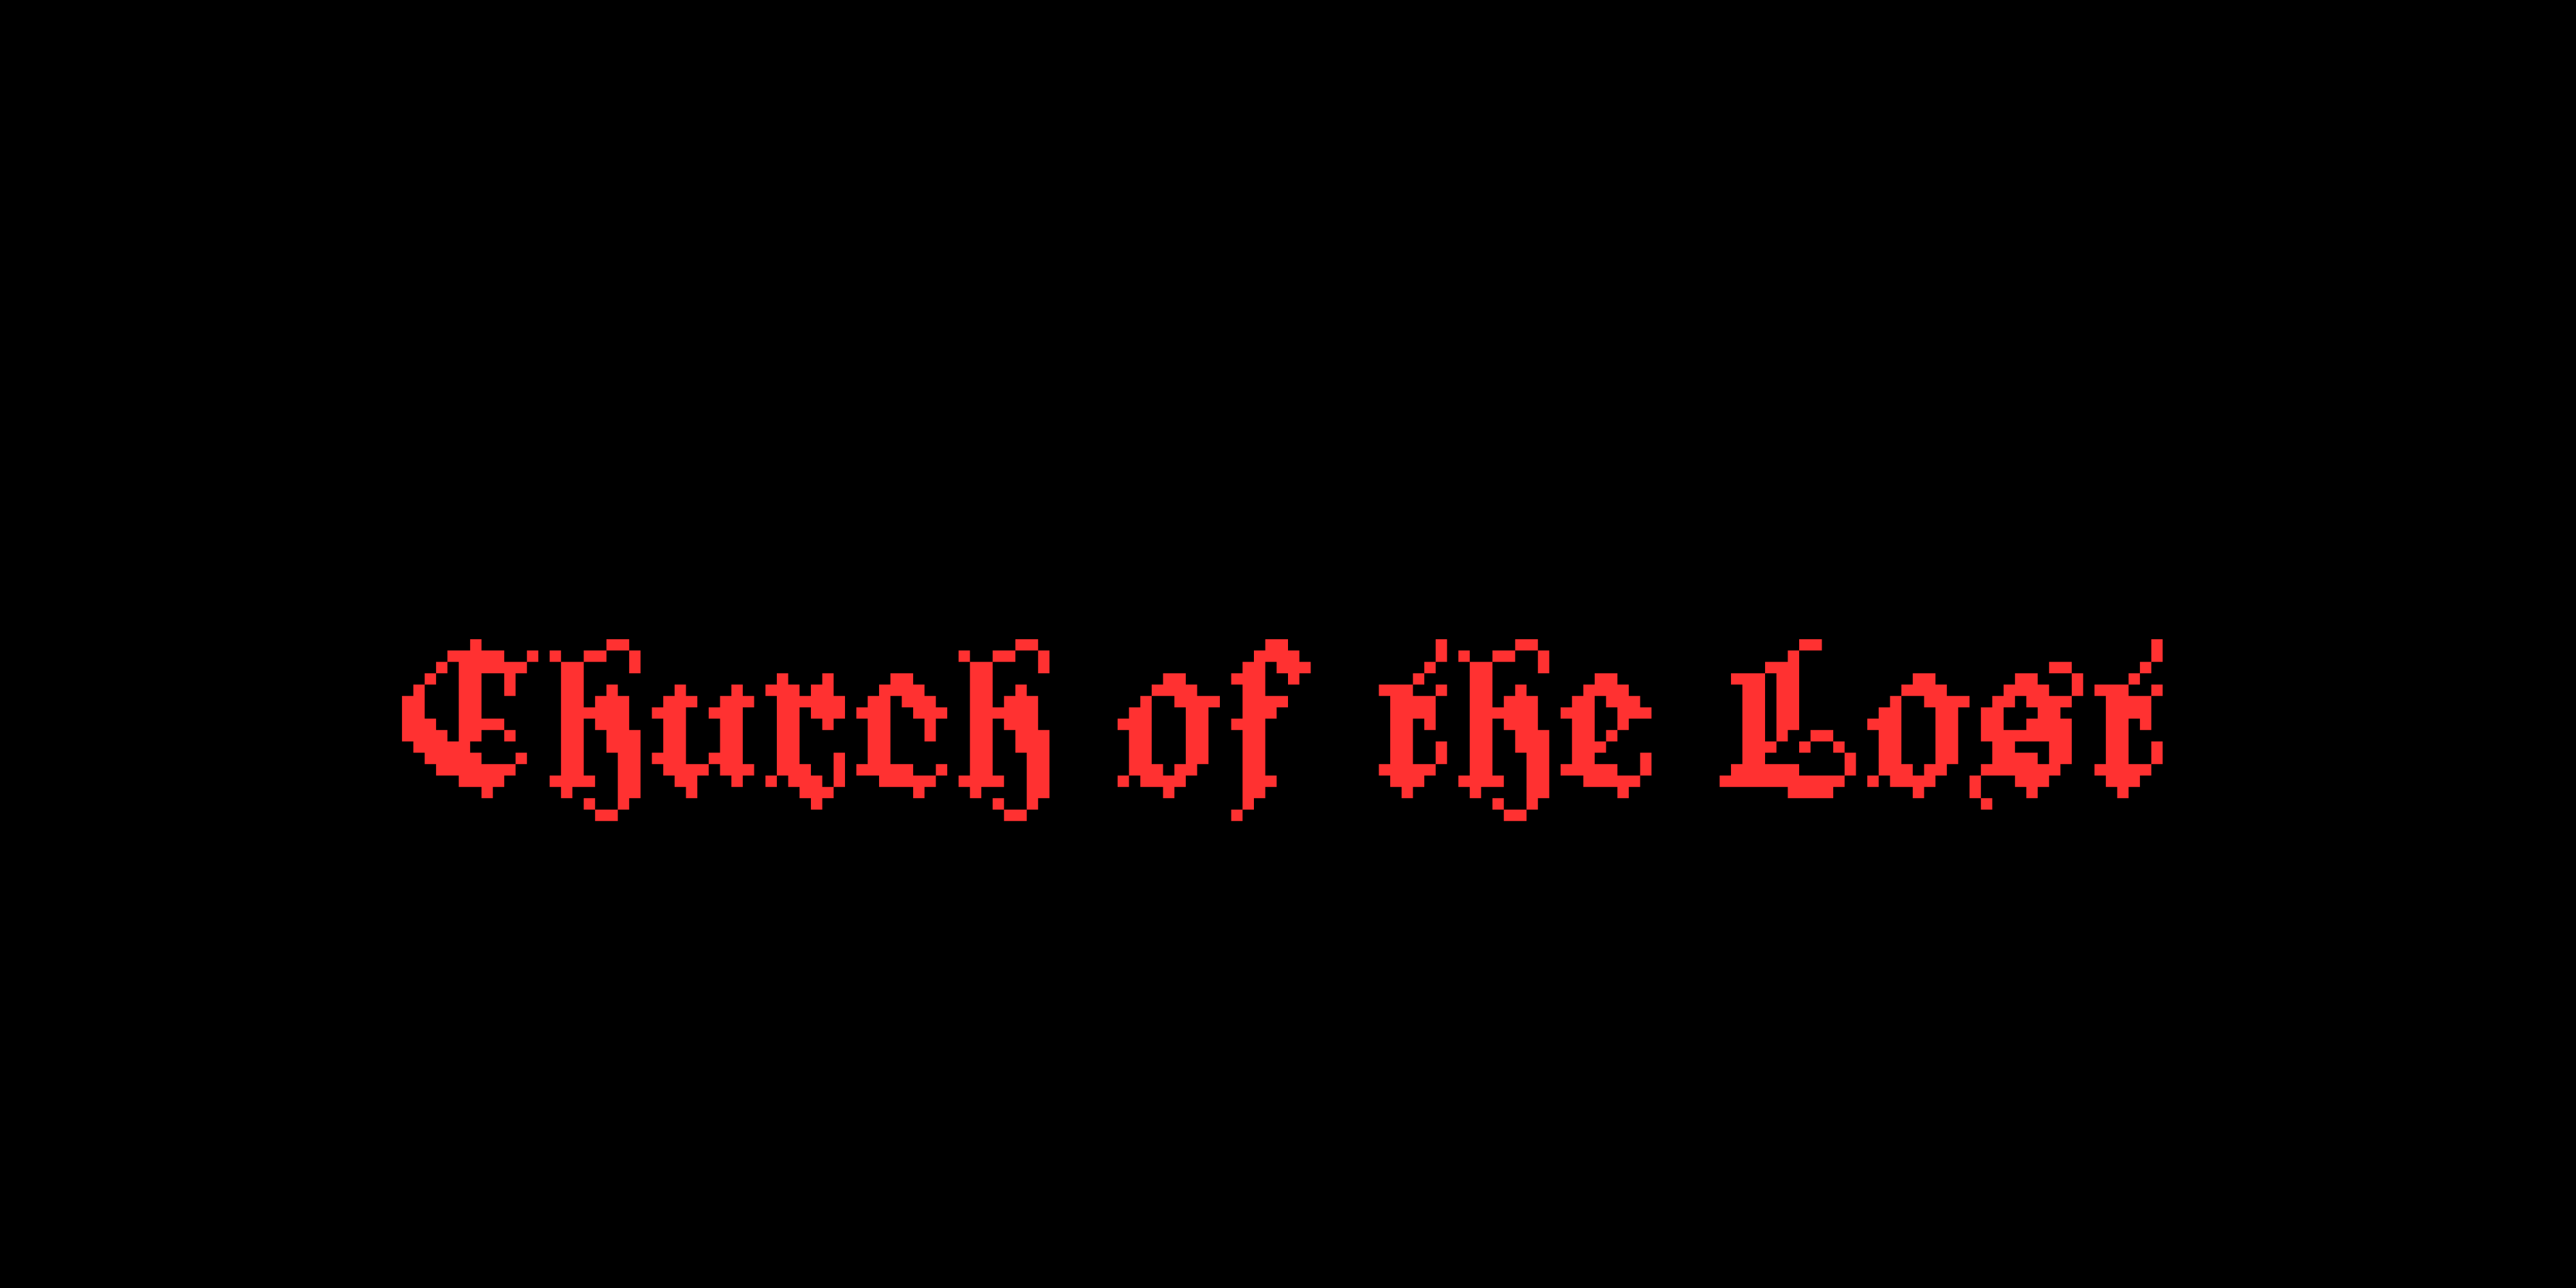 Church of the Lost